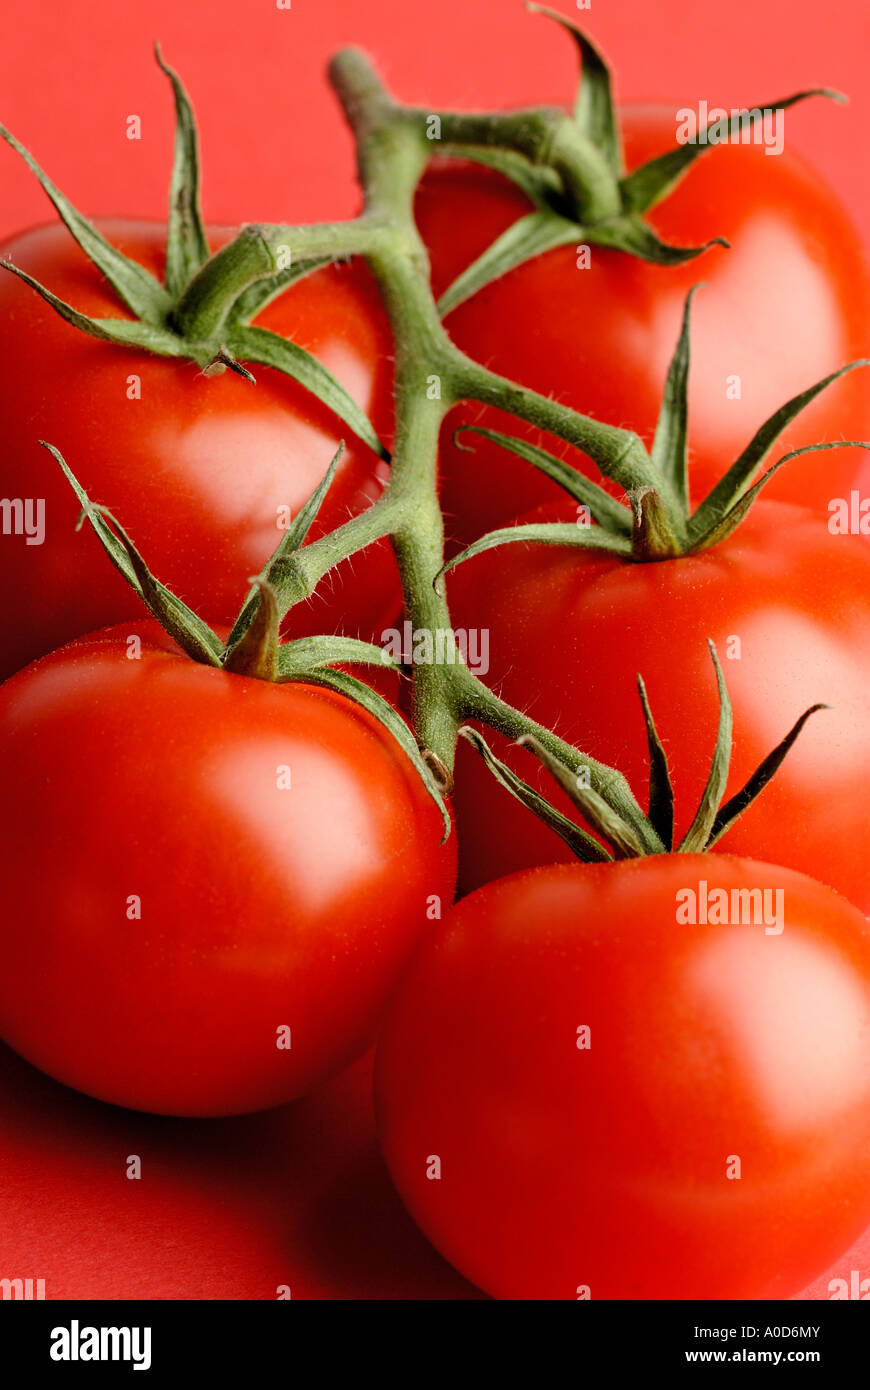 red tomatoes Stock Photo